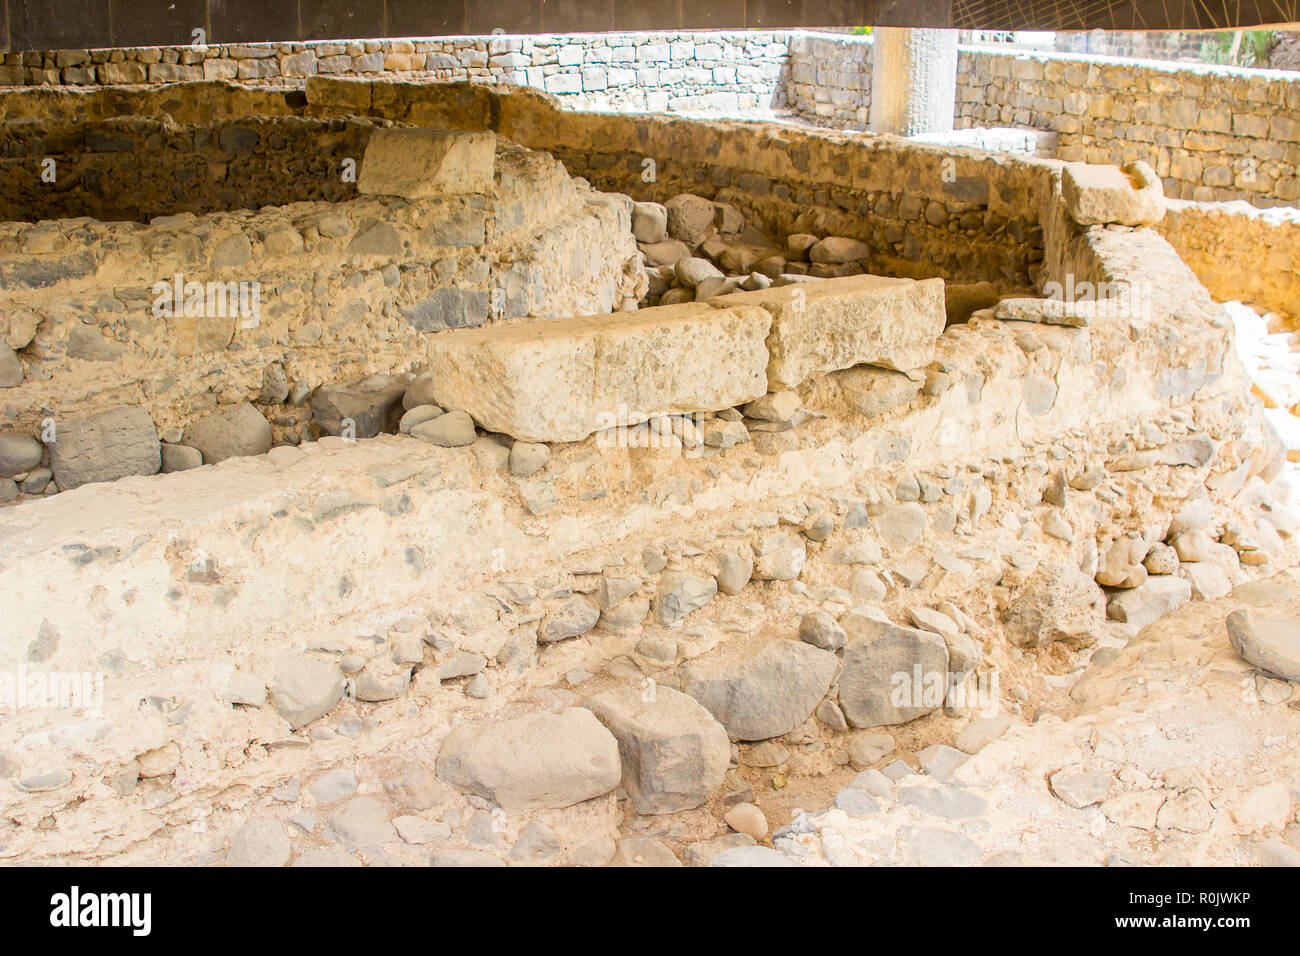 3 May 2018 The excavated ruins of what is believed to be St Peter's house iin the ancient town of Capernaum in Israel Stock Photo